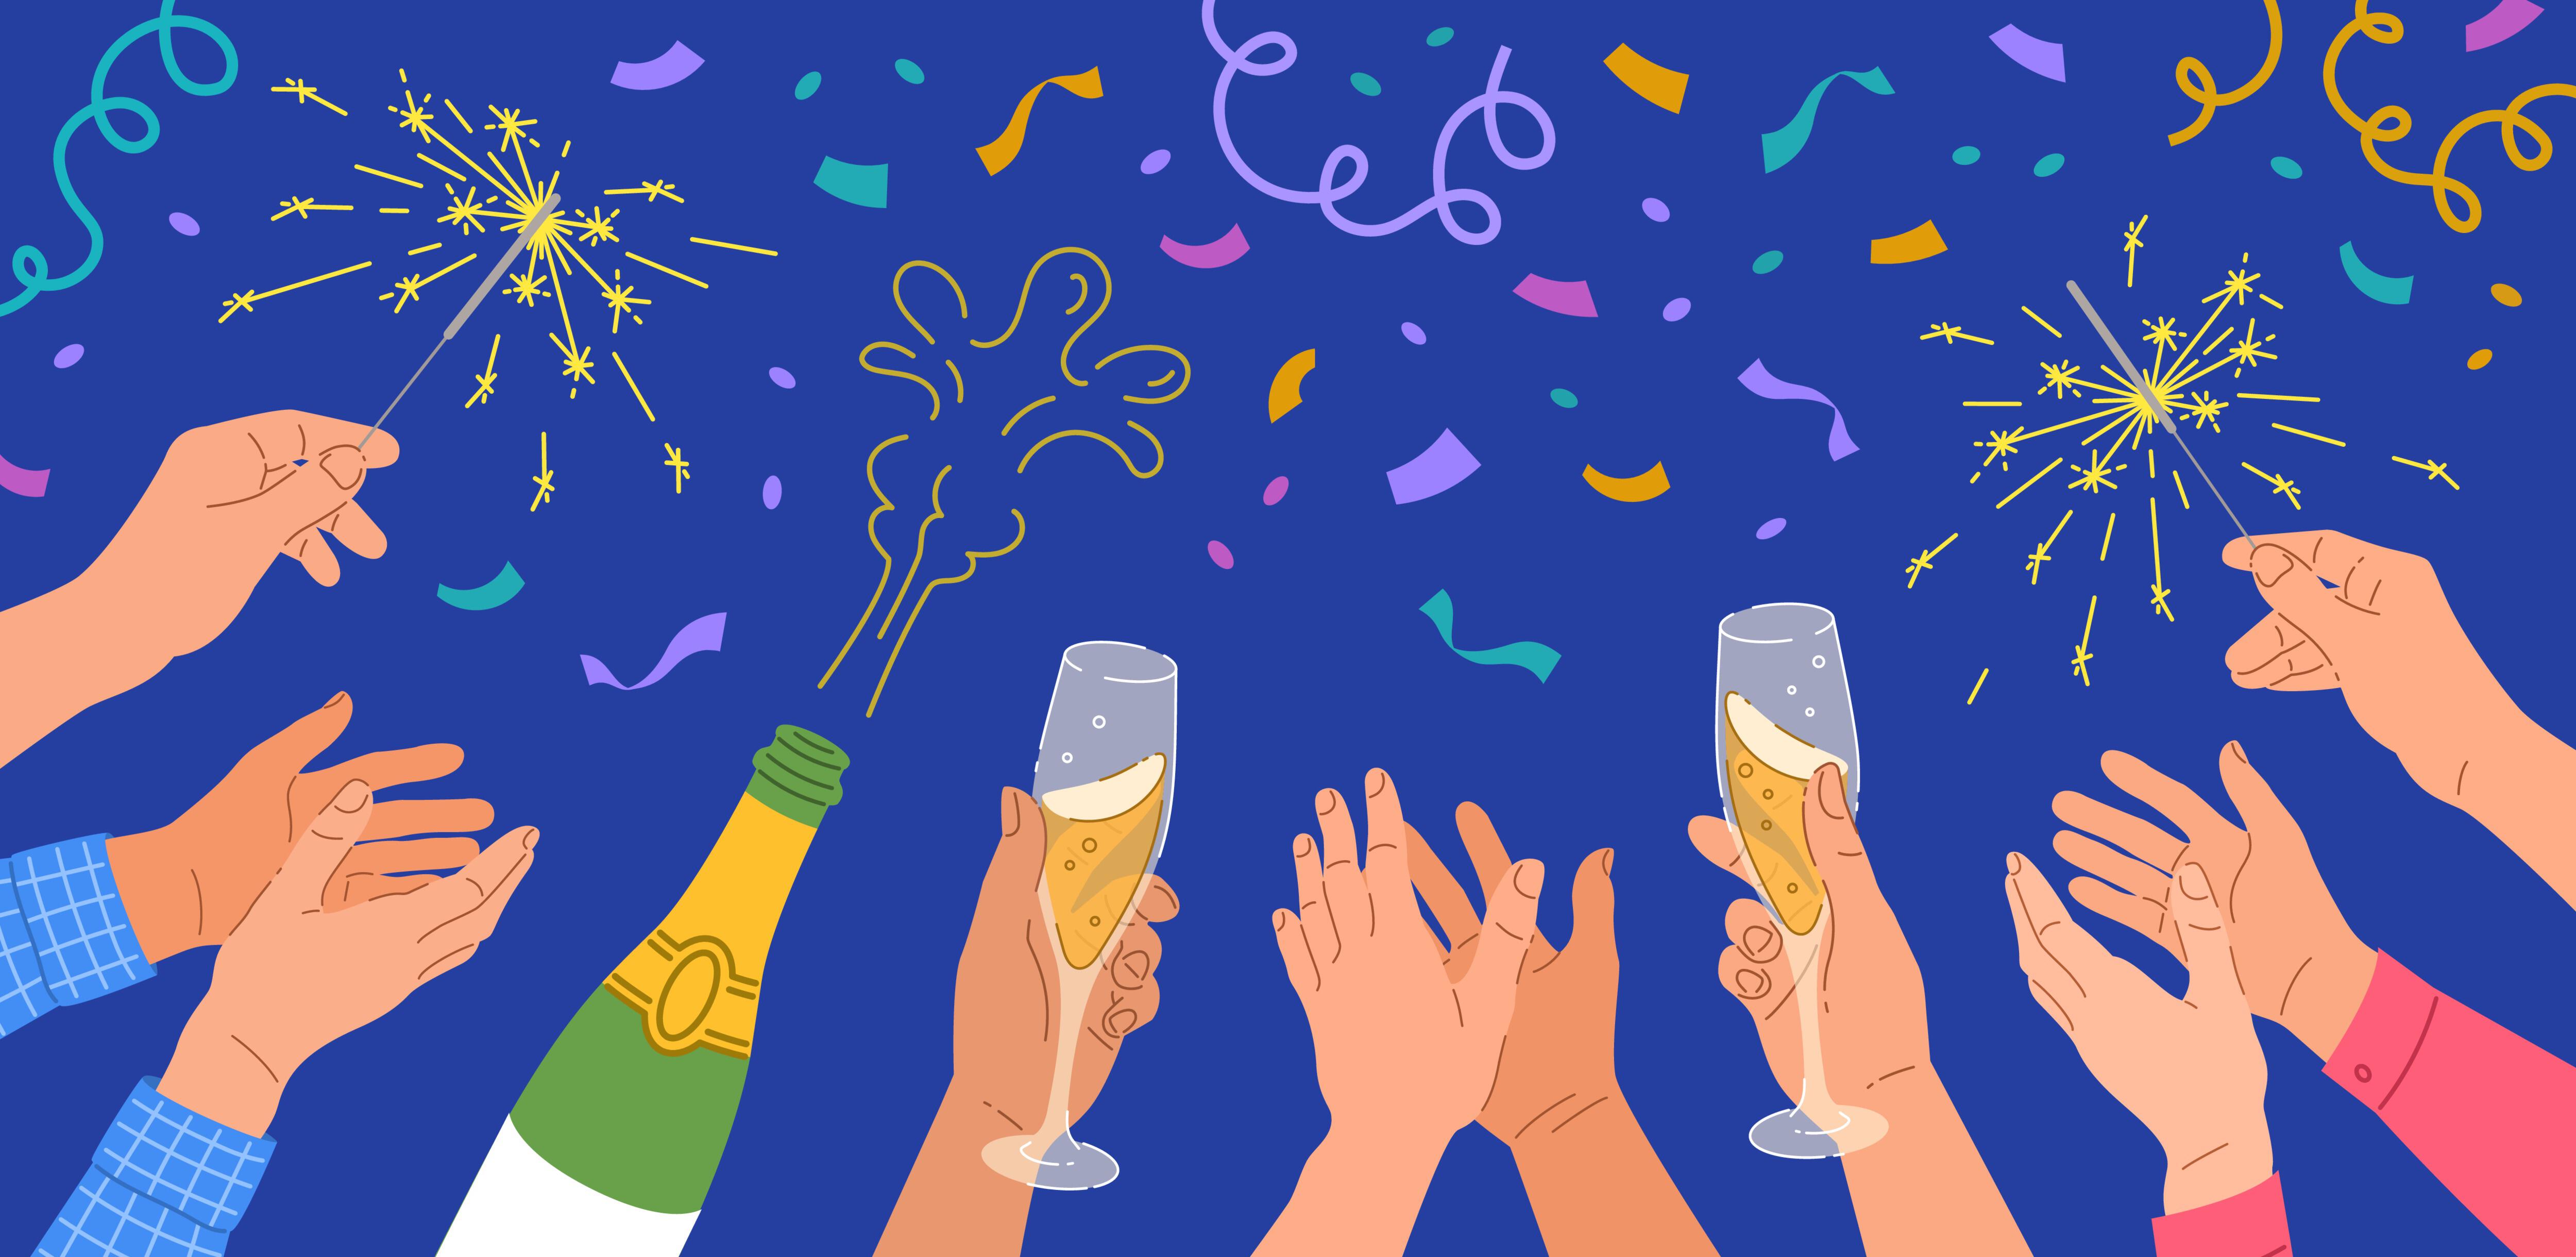 Image of people's hands holding up champagne glasses with confetti